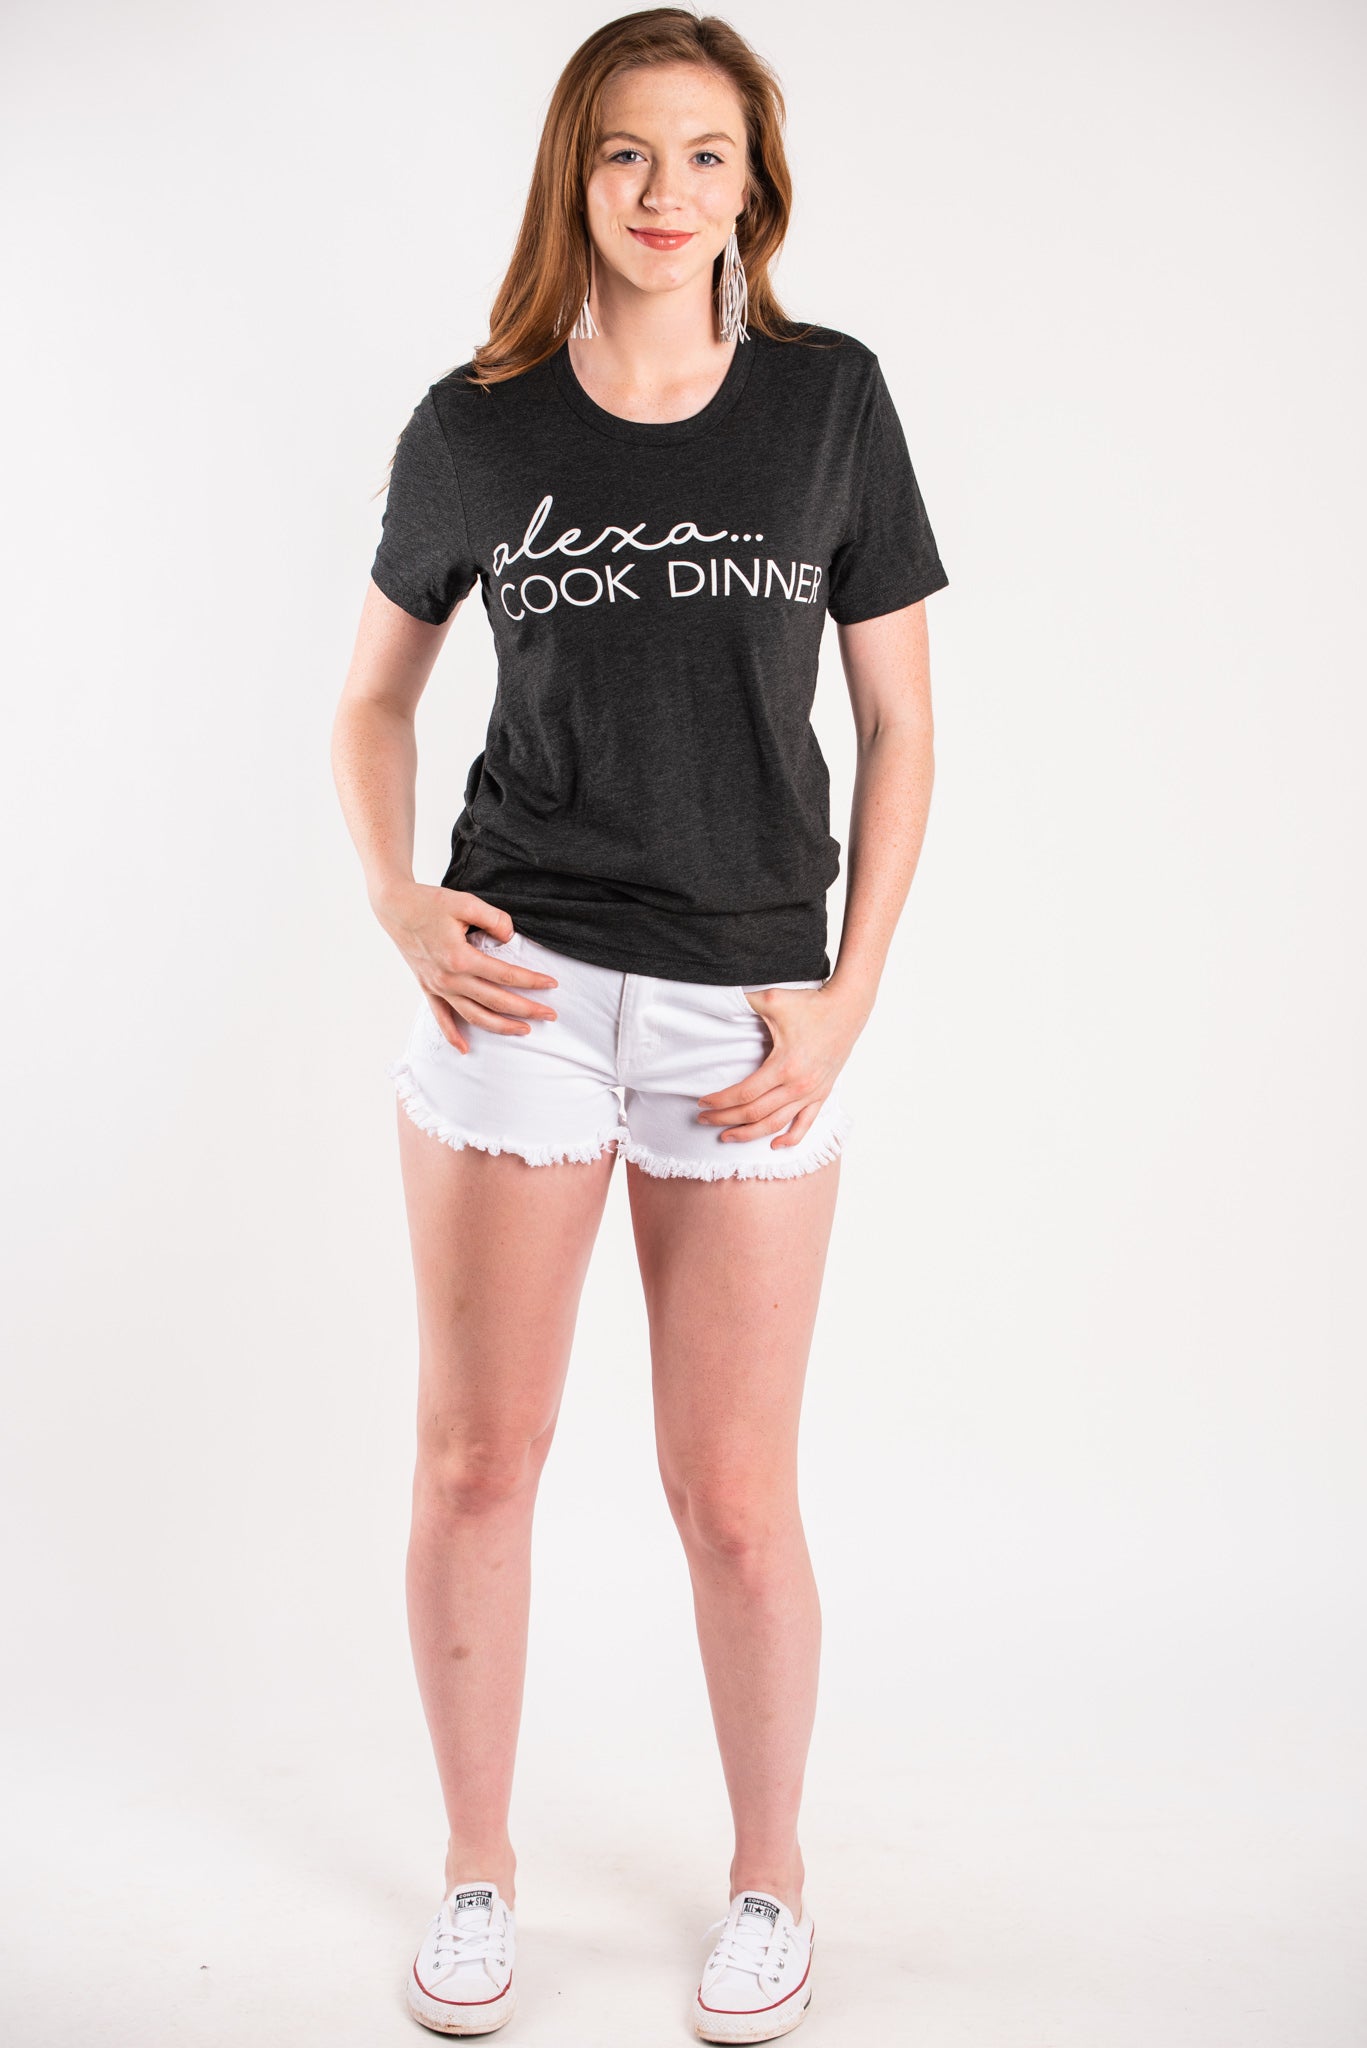 Alexa cook dinner unisex short sleeve t-shirt charcoal - Trendy T-shirts - Cute Graphic Tee Fashion at Lush Fashion Lounge Boutique in Oklahoma